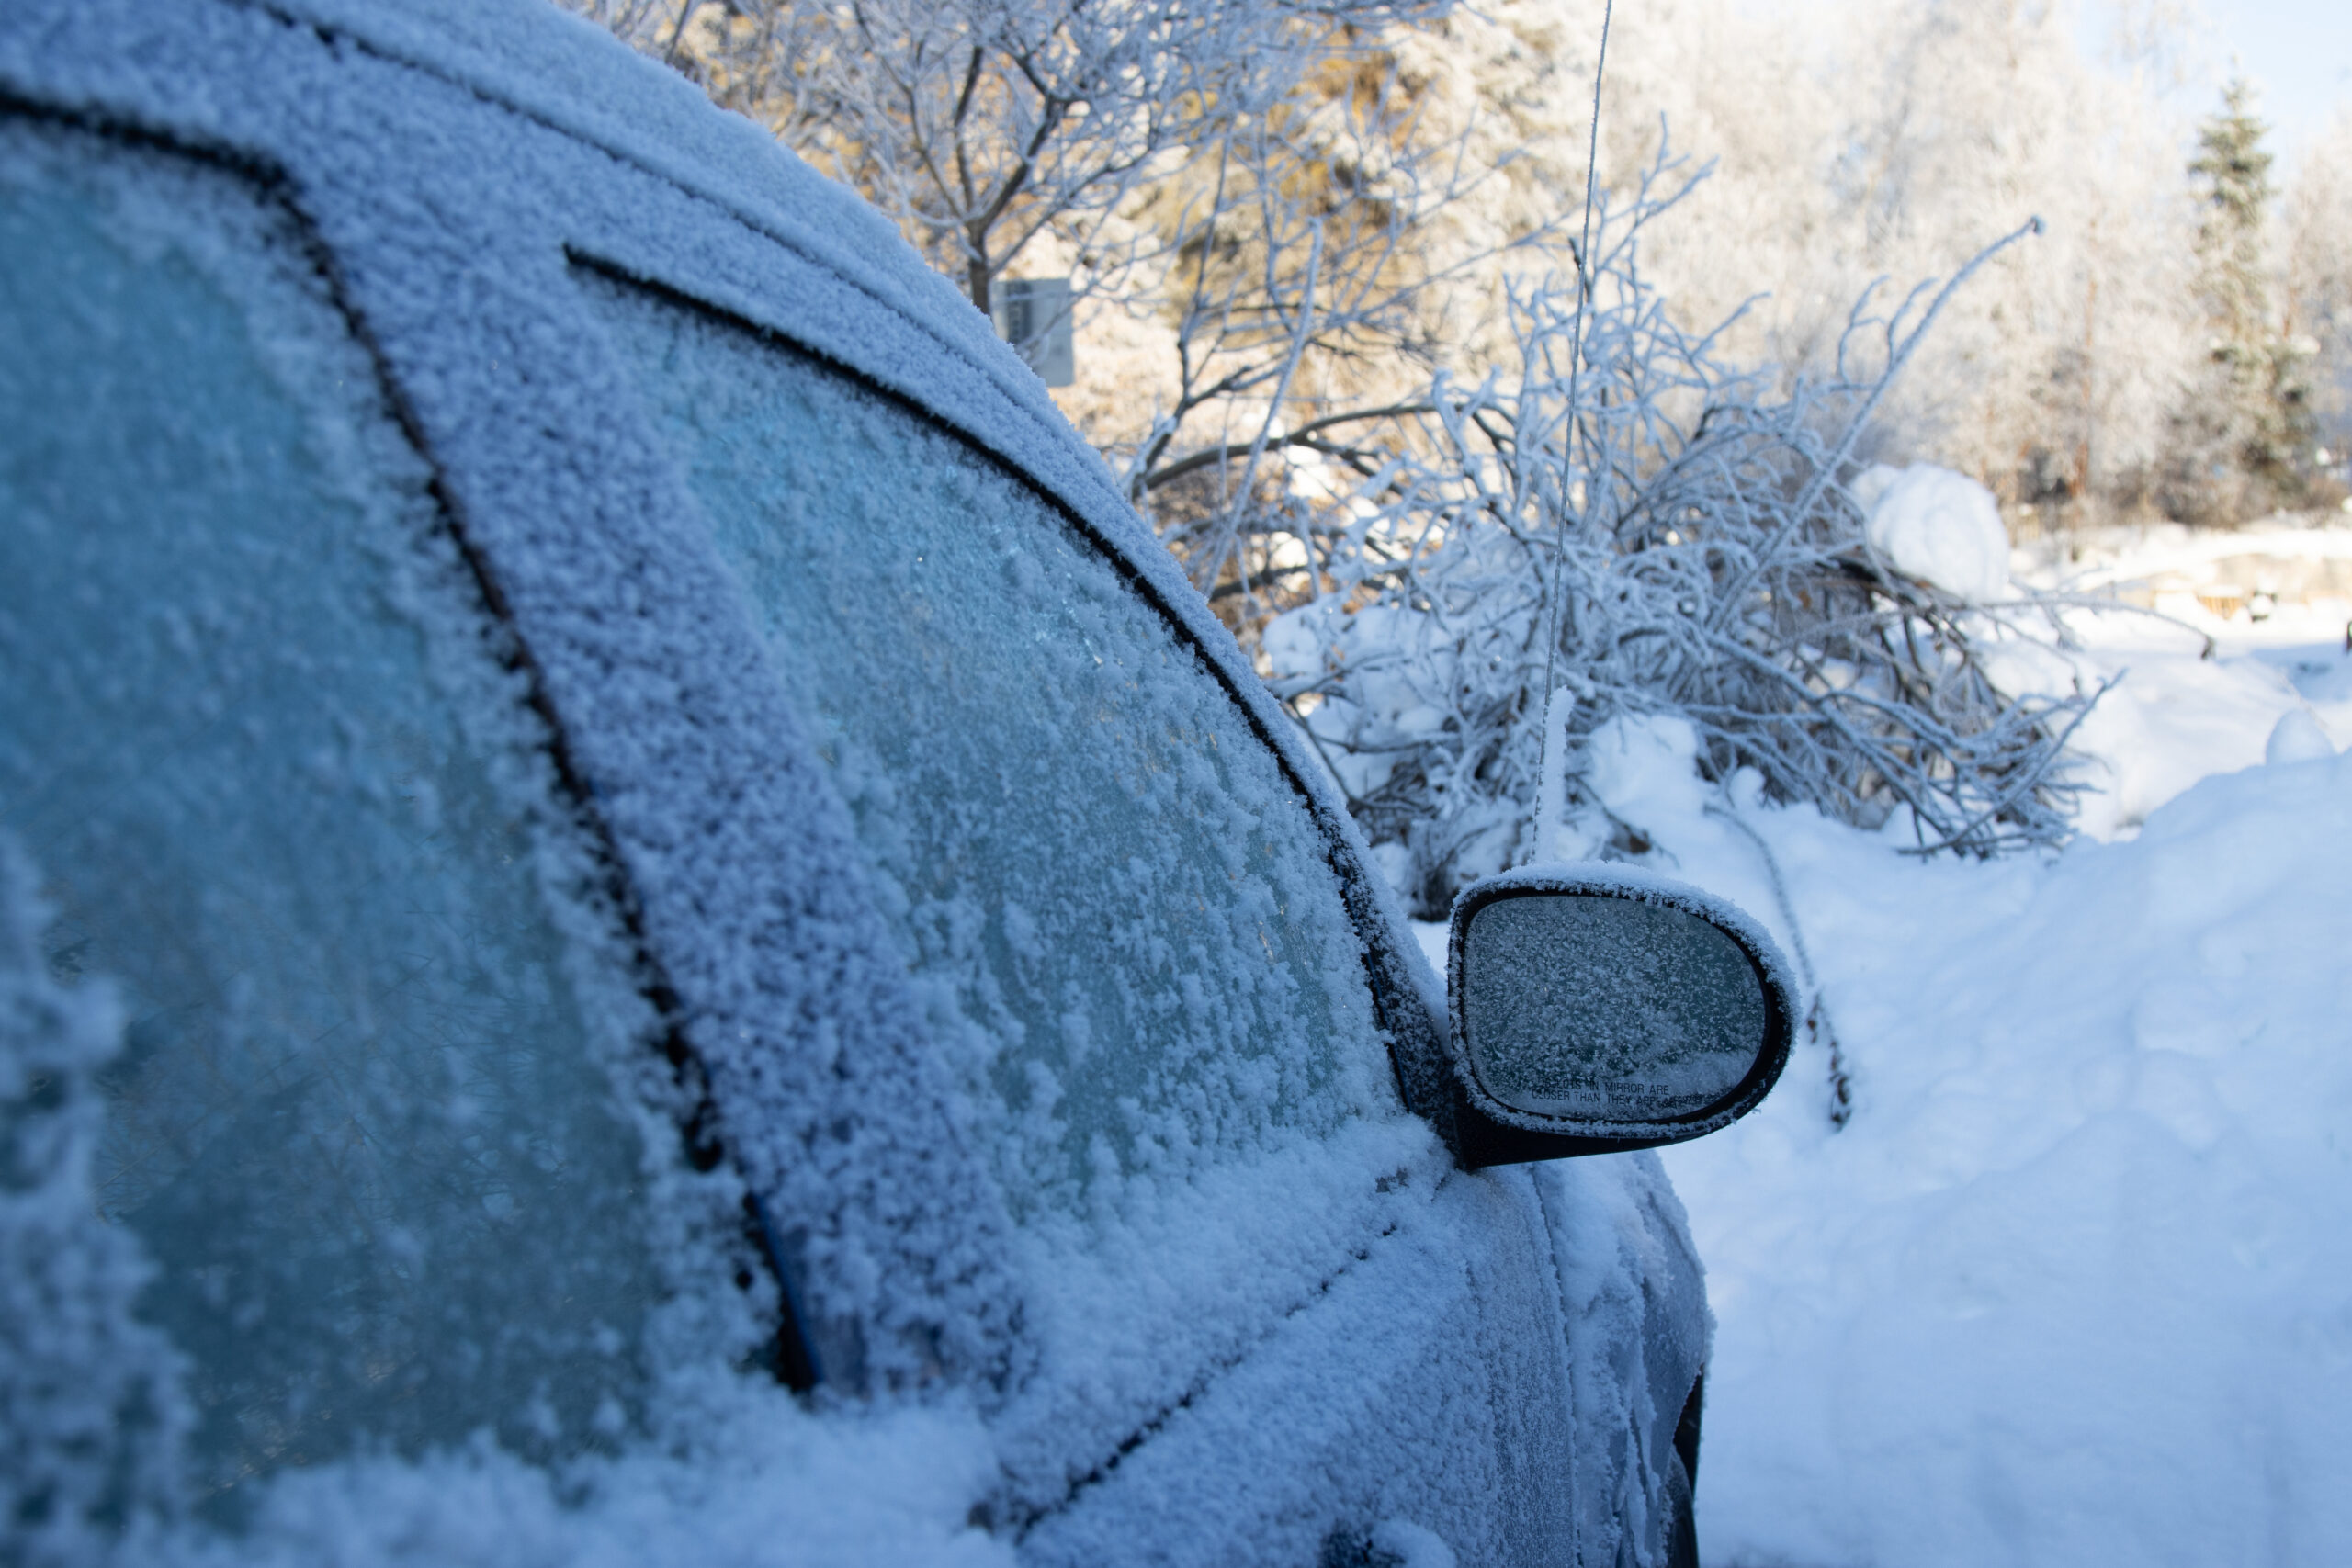 A car covered in frost sits in the shade with snow covering the ground.